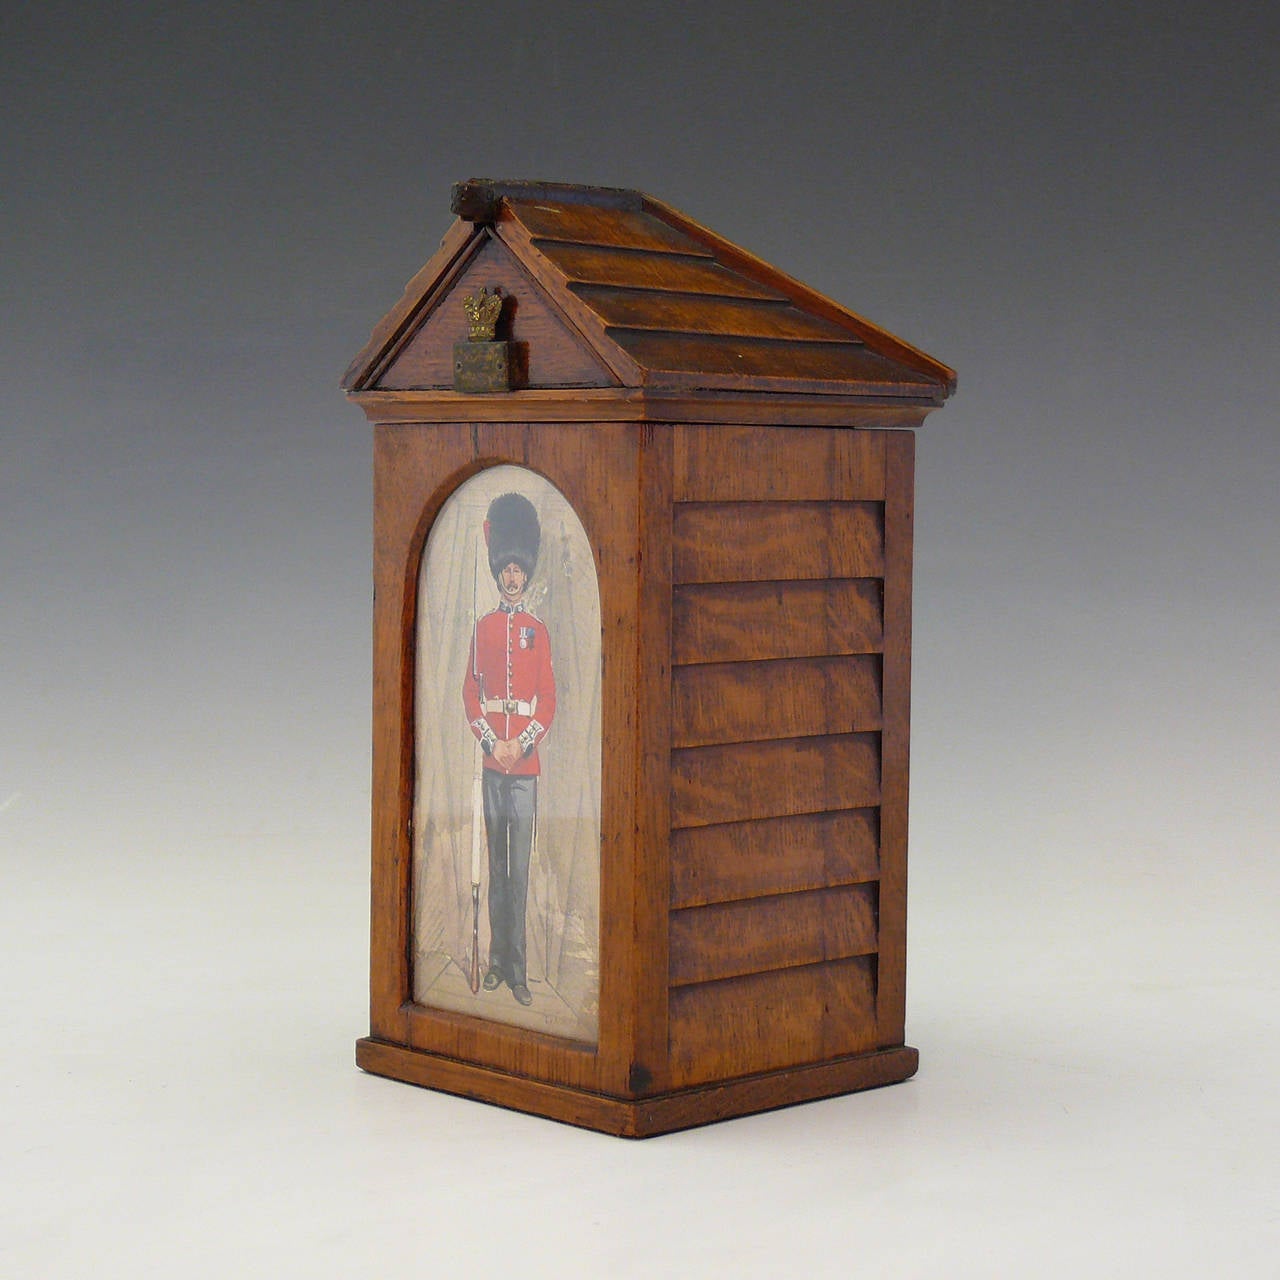 An oak cigar box modelled as a sentry box with a watercolor of uniformed guardsman in his bearskin, by renowned military artist Richard Simkin, circa 1890.

During his lifetime, Richard Simkin produced thousands of watercolors depicting the uniforms